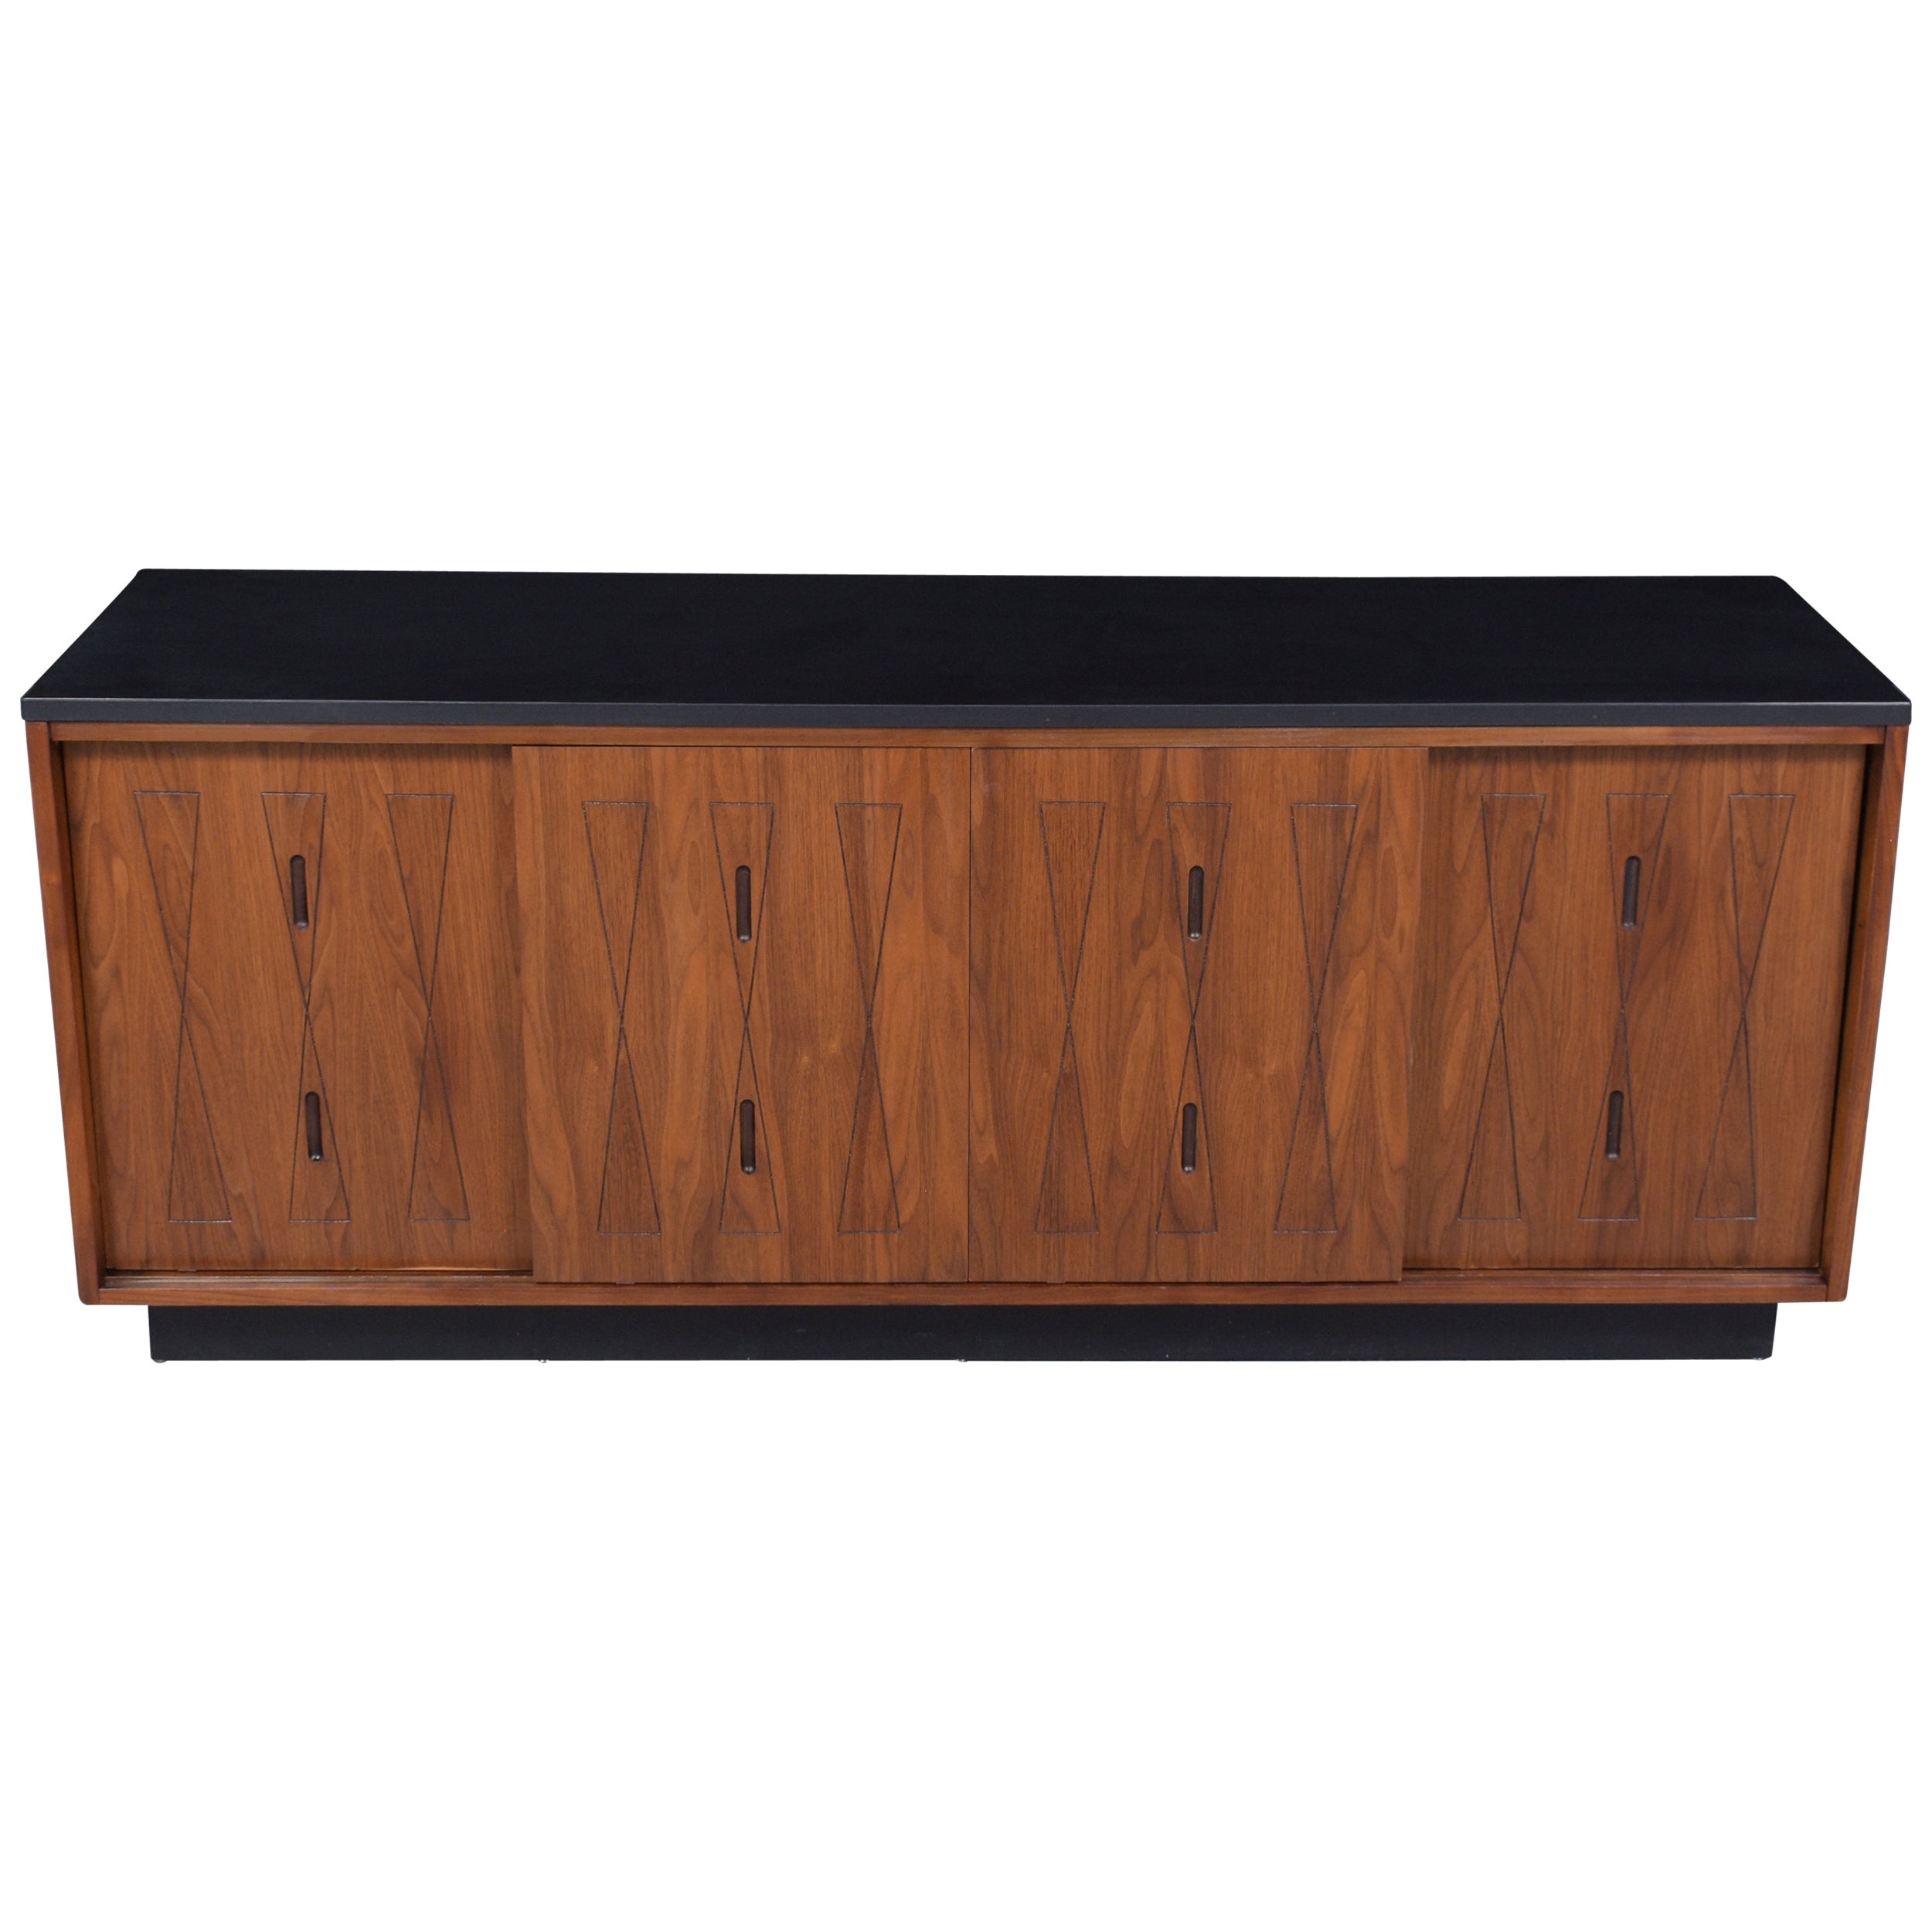 Rediscover the timeless elegance of the 1960s with our exquisitely restored vintage credenza, a showcase of the exceptional craftsmanship characteristic of the mid-century era. Our skilled craftsmen have meticulously refinished this piece to the